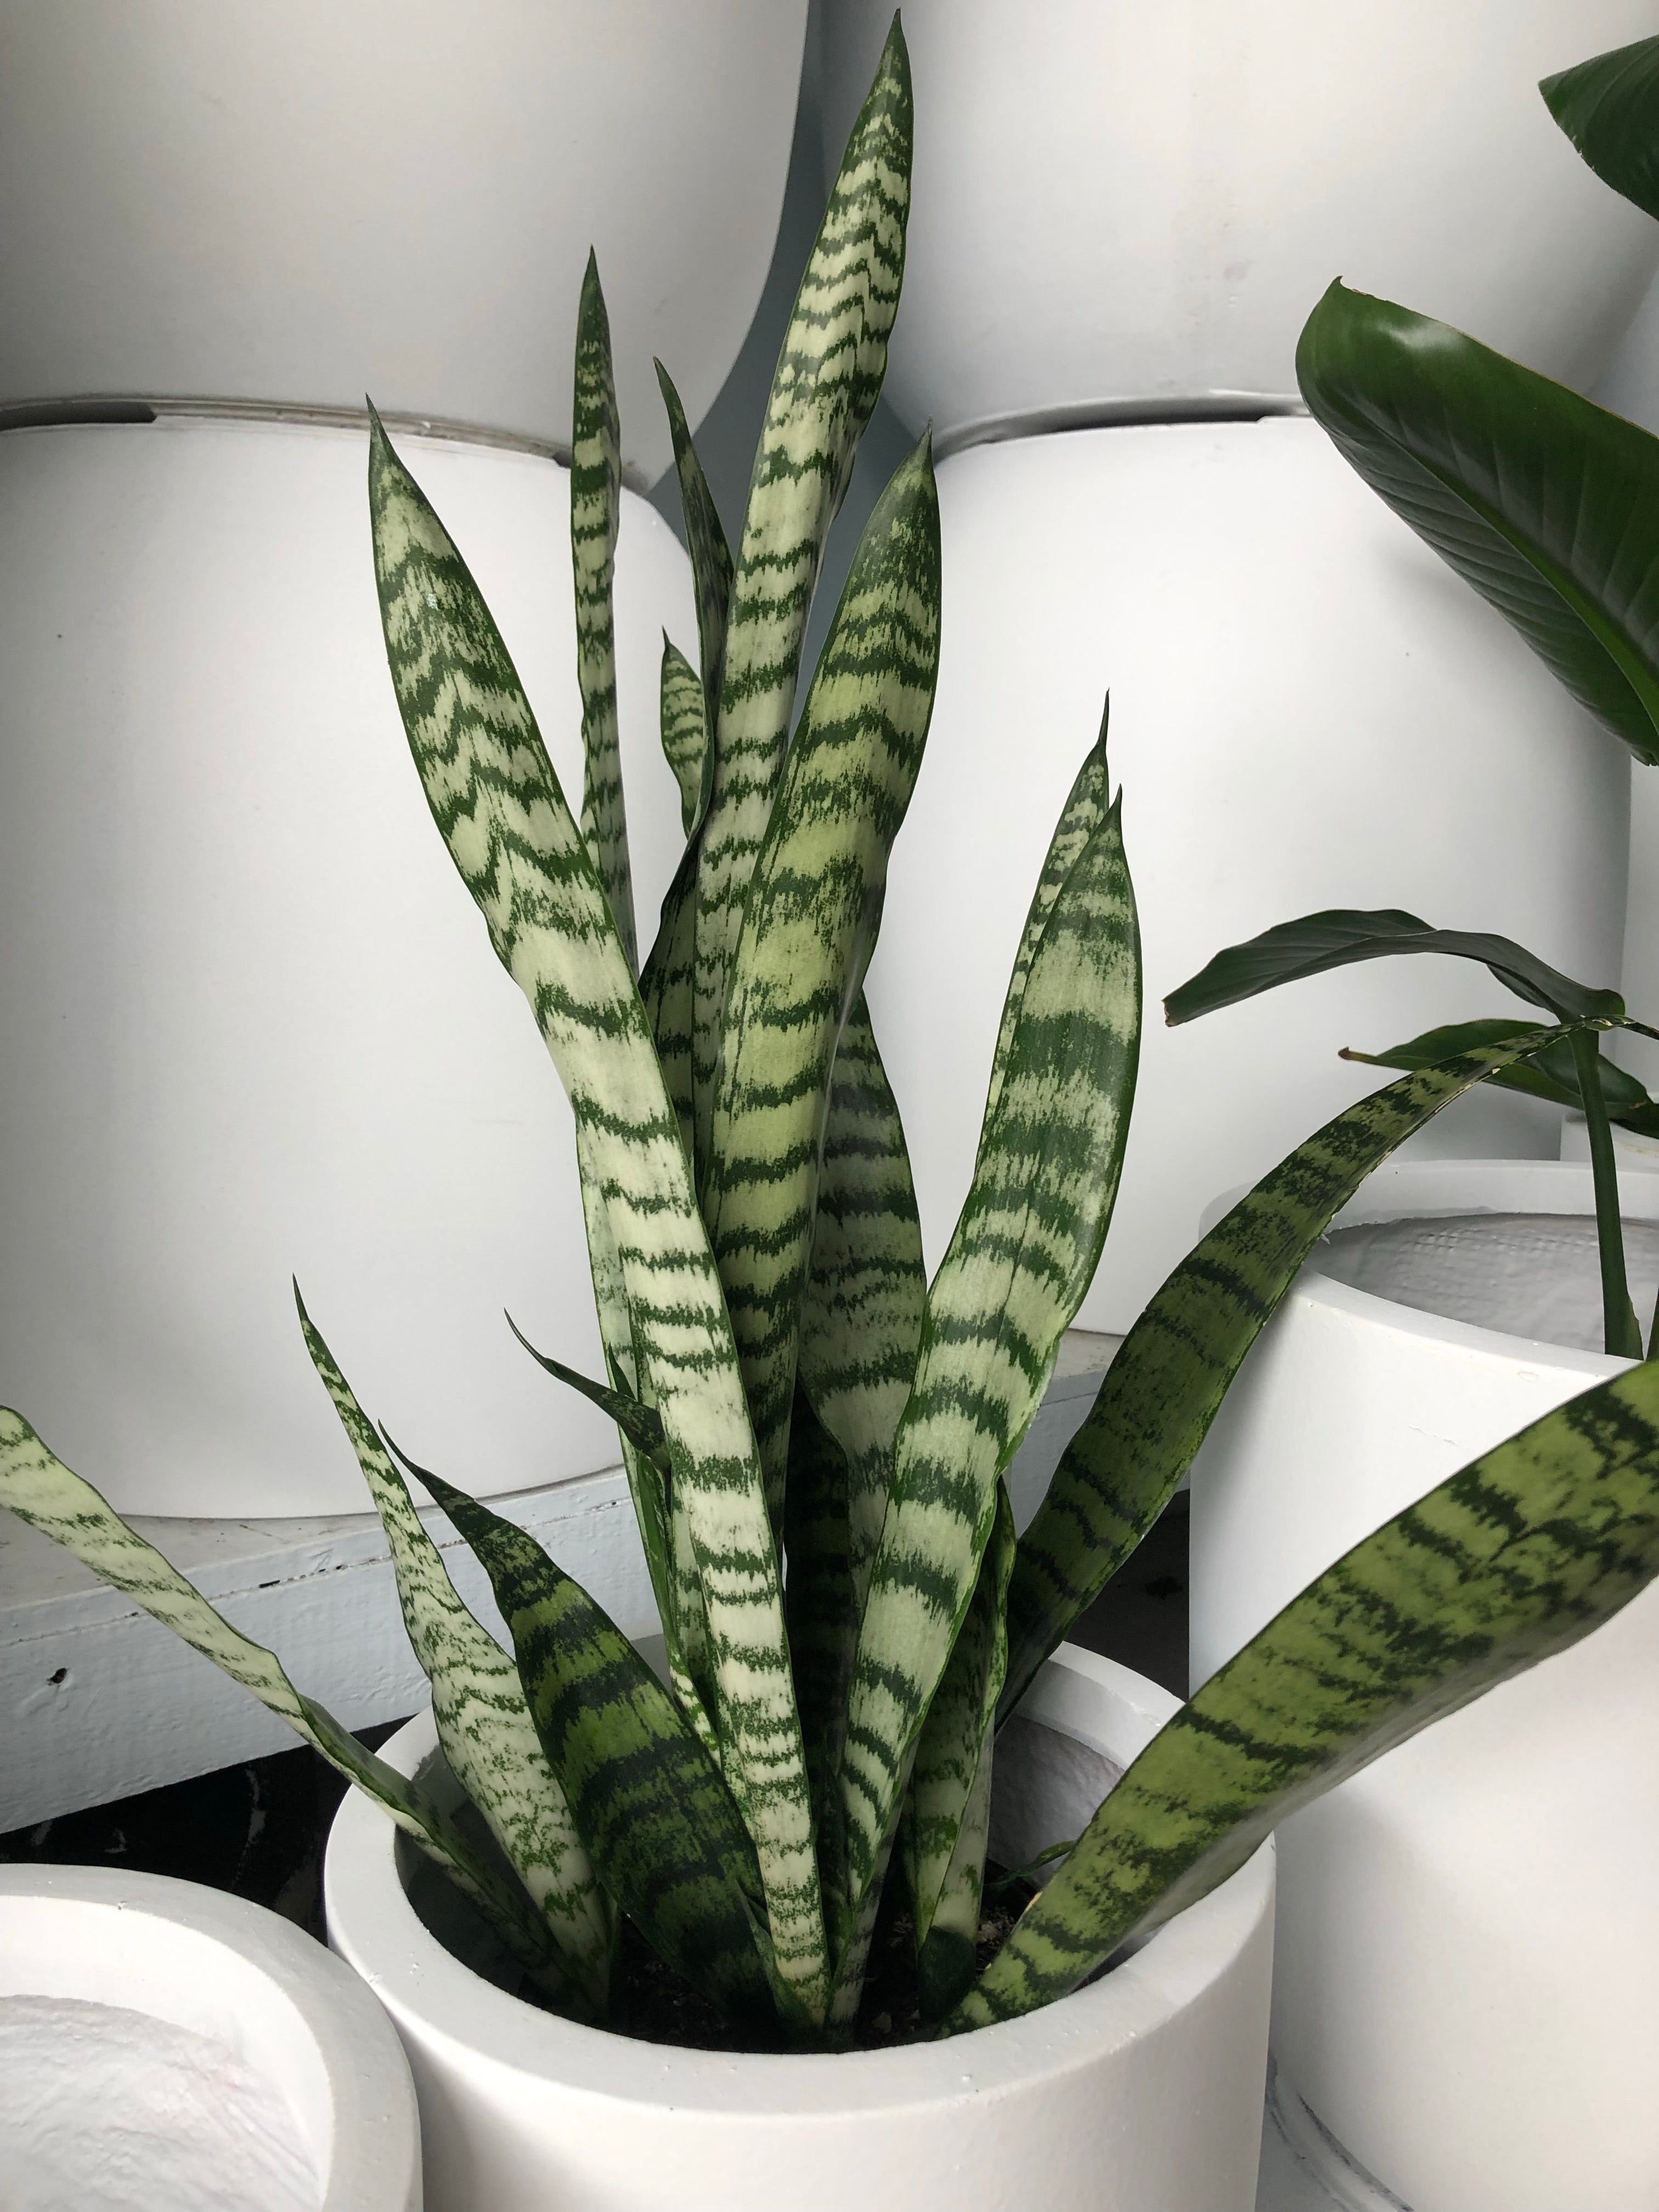 Sansevieria trifasciata - Mother In Laws Tongue